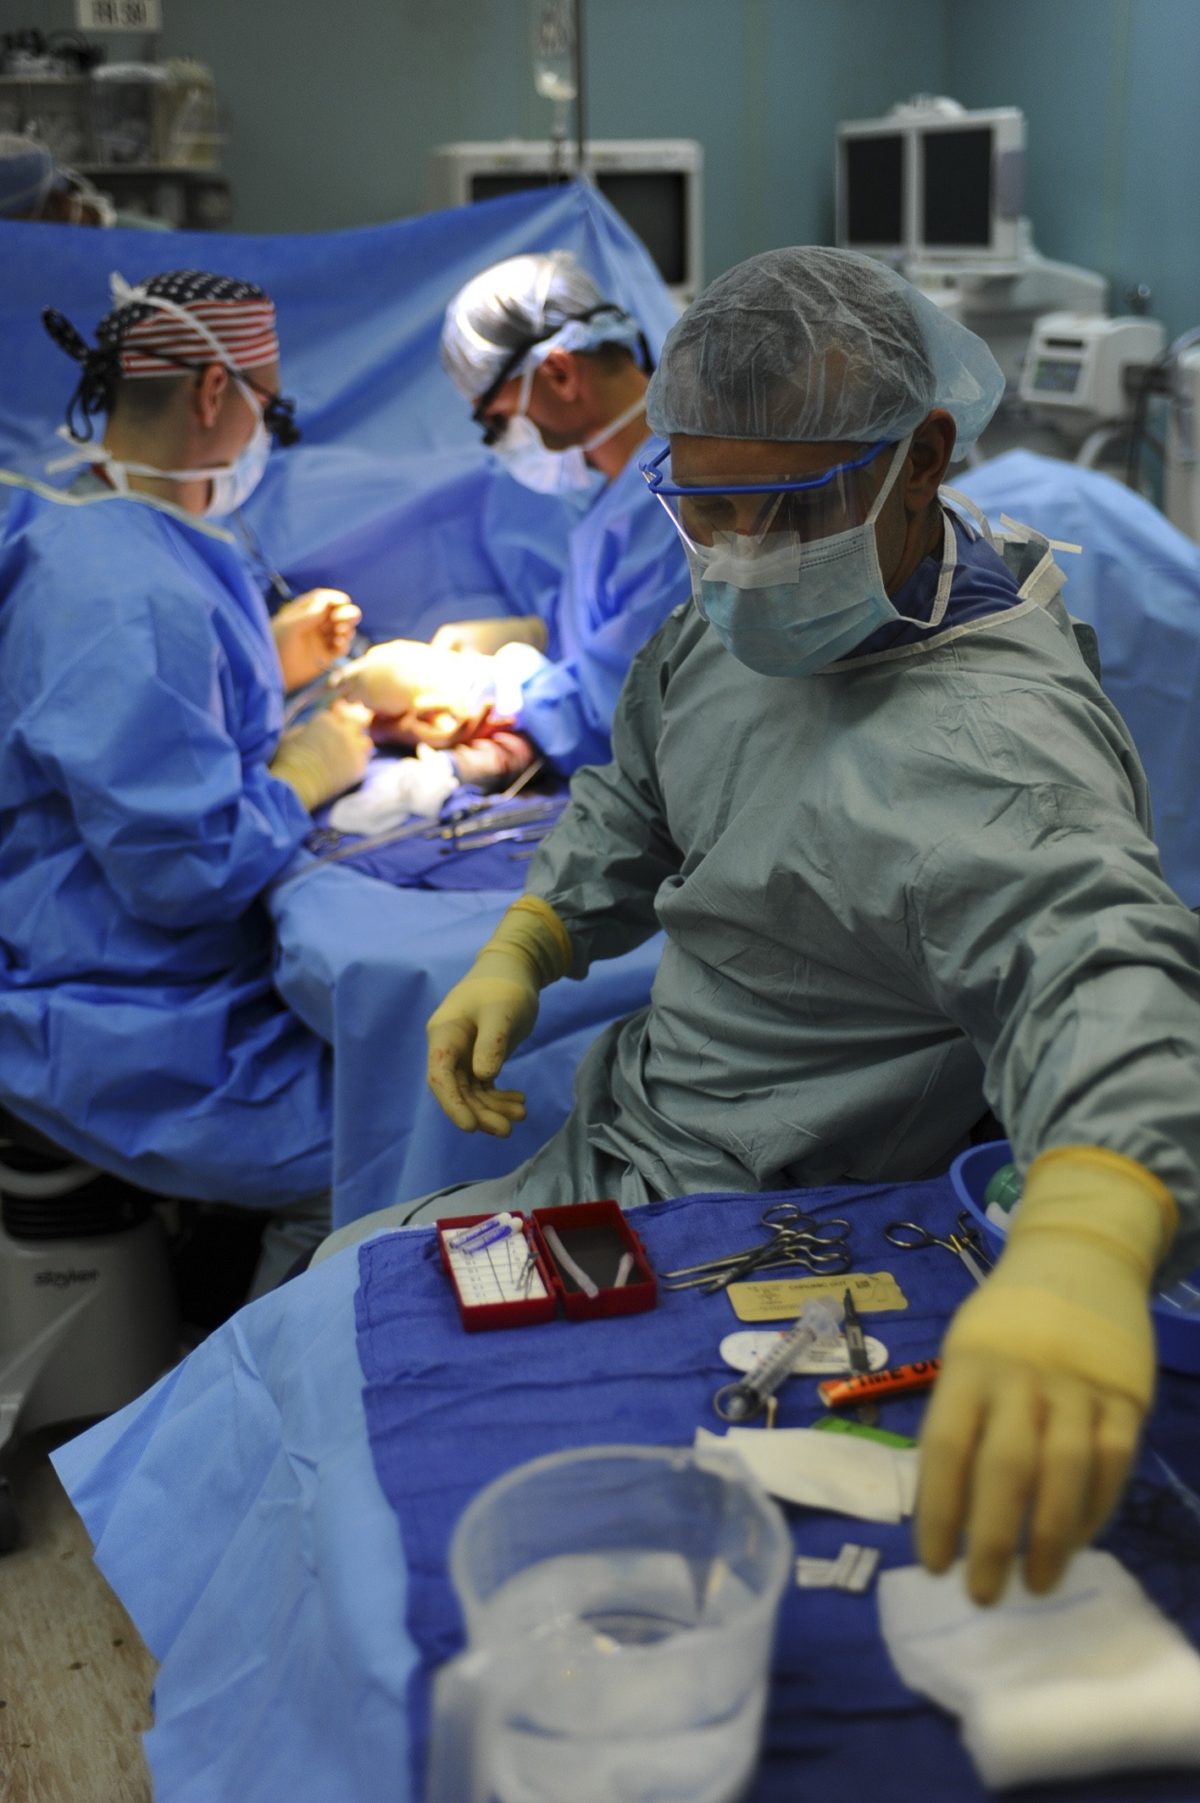 A team of medical professionals performing surgery.